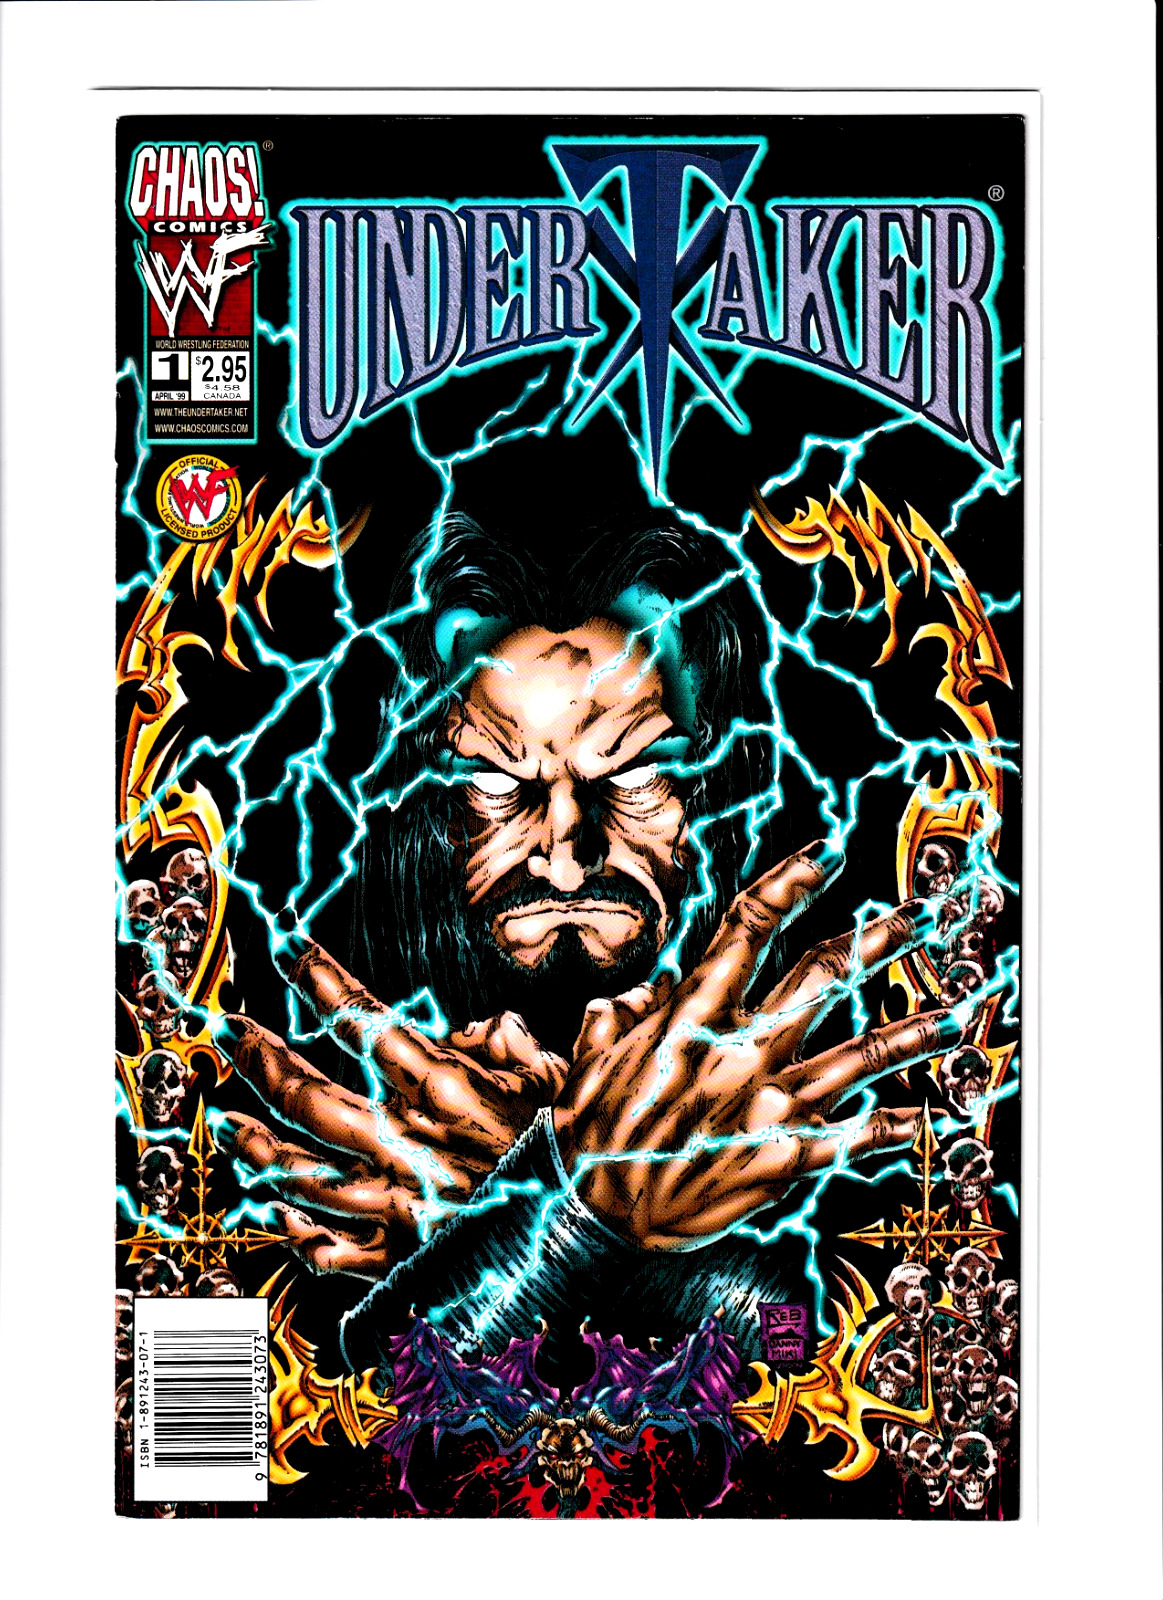 WWF WWE UNDERTAKER #1 CHAOS COMICS WRESTLING REB COVER NEWSTAND WOW  A78